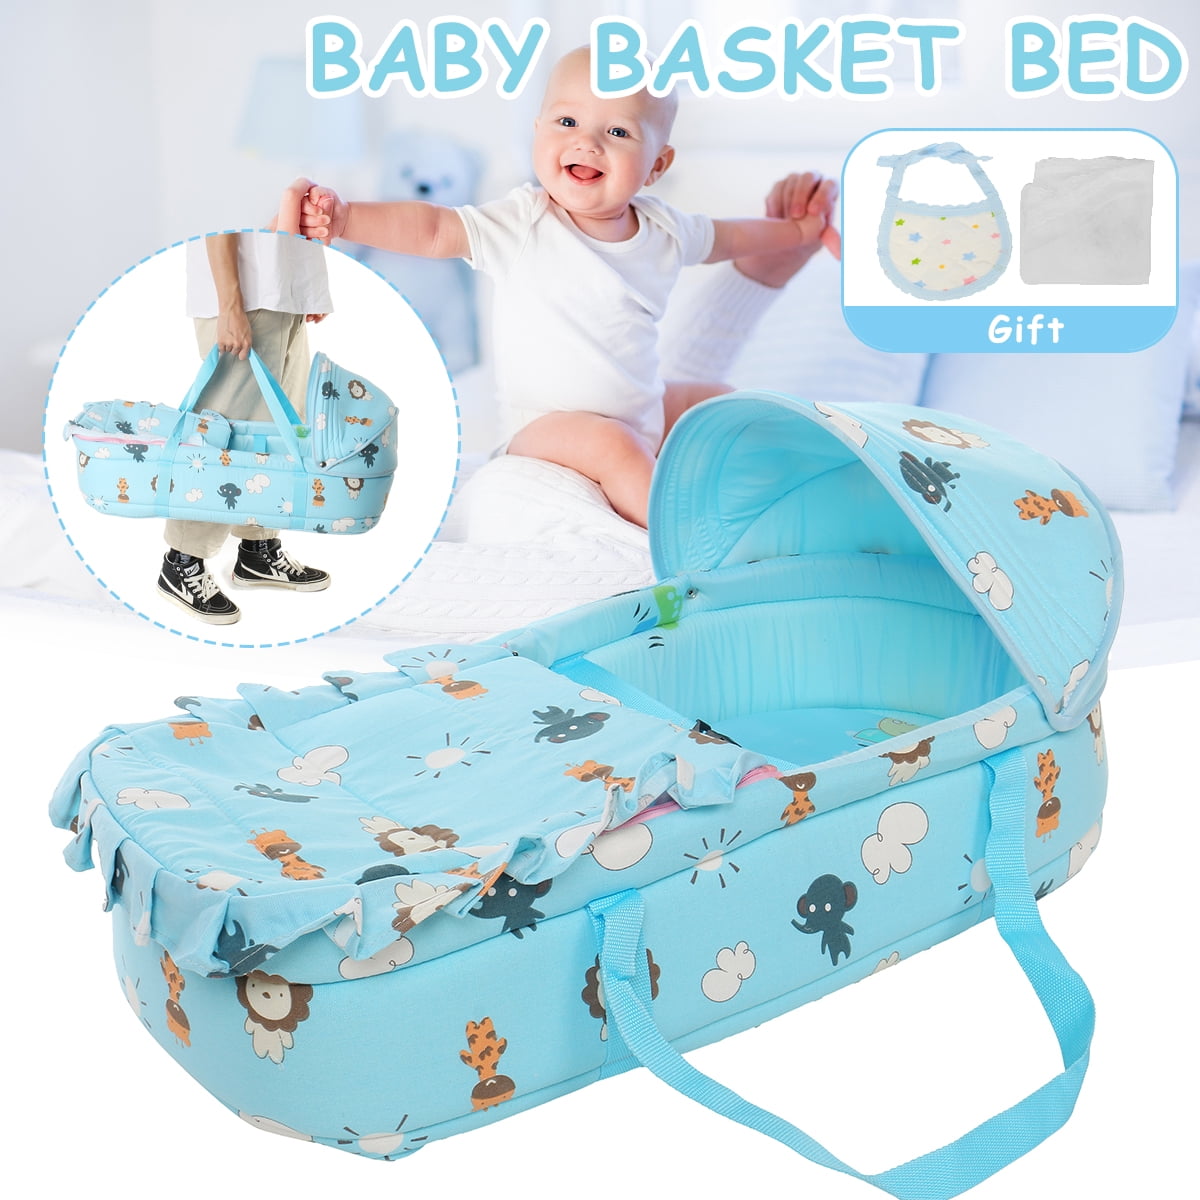 Newborn Baby Bassinets Portable Travel Nest Pod Infant Lounger Sleeper Crib with Canopy Bule